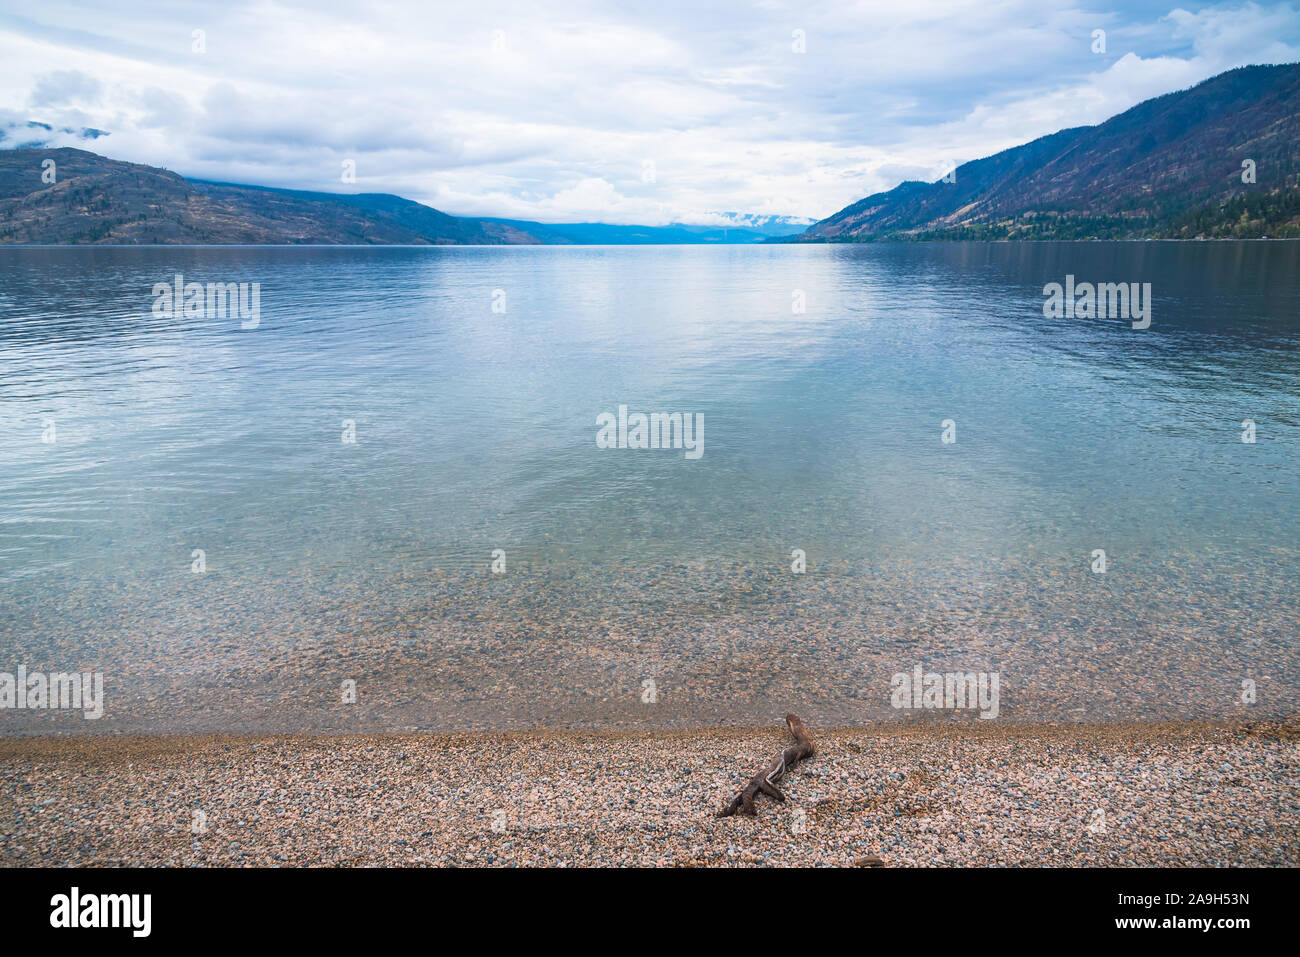 View of pebble beach, calm lake, mountains, and overcast sky at Antler's Beach, Peachland, British Columbia, Canada Stock Photo